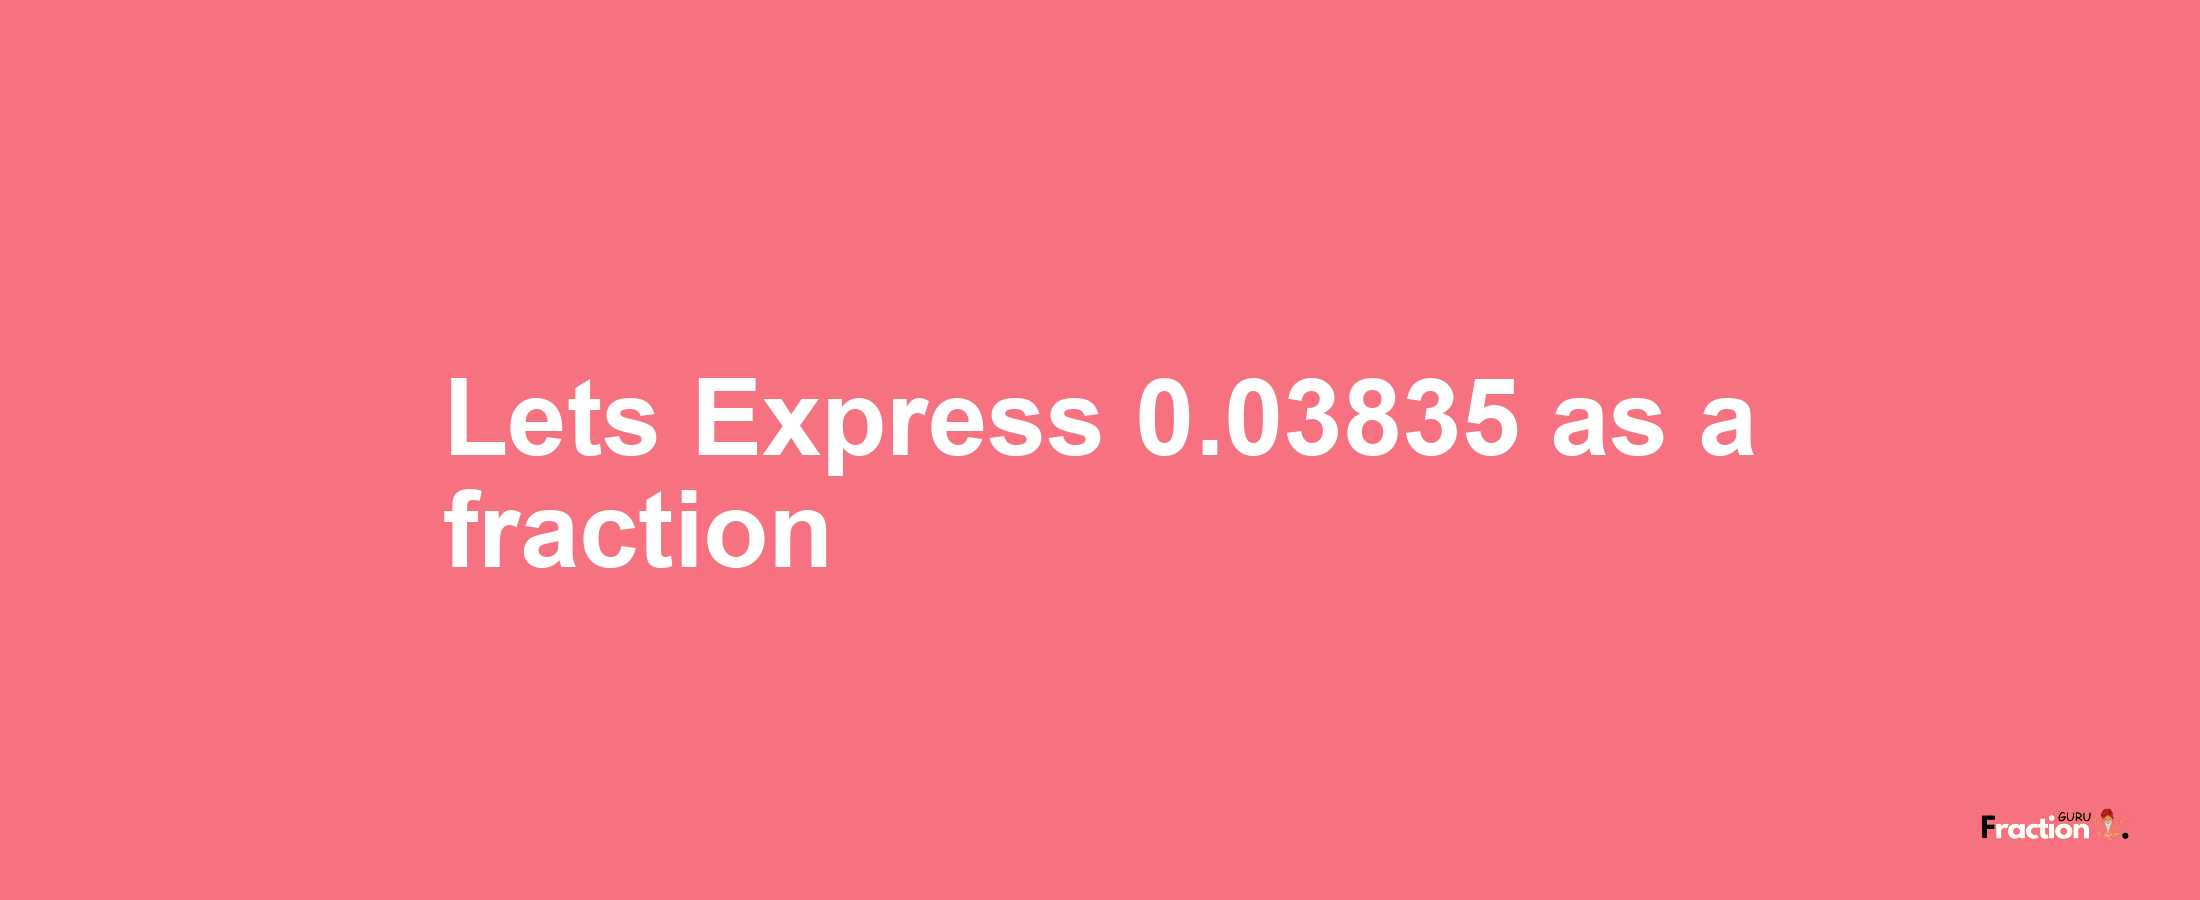 Lets Express 0.03835 as afraction